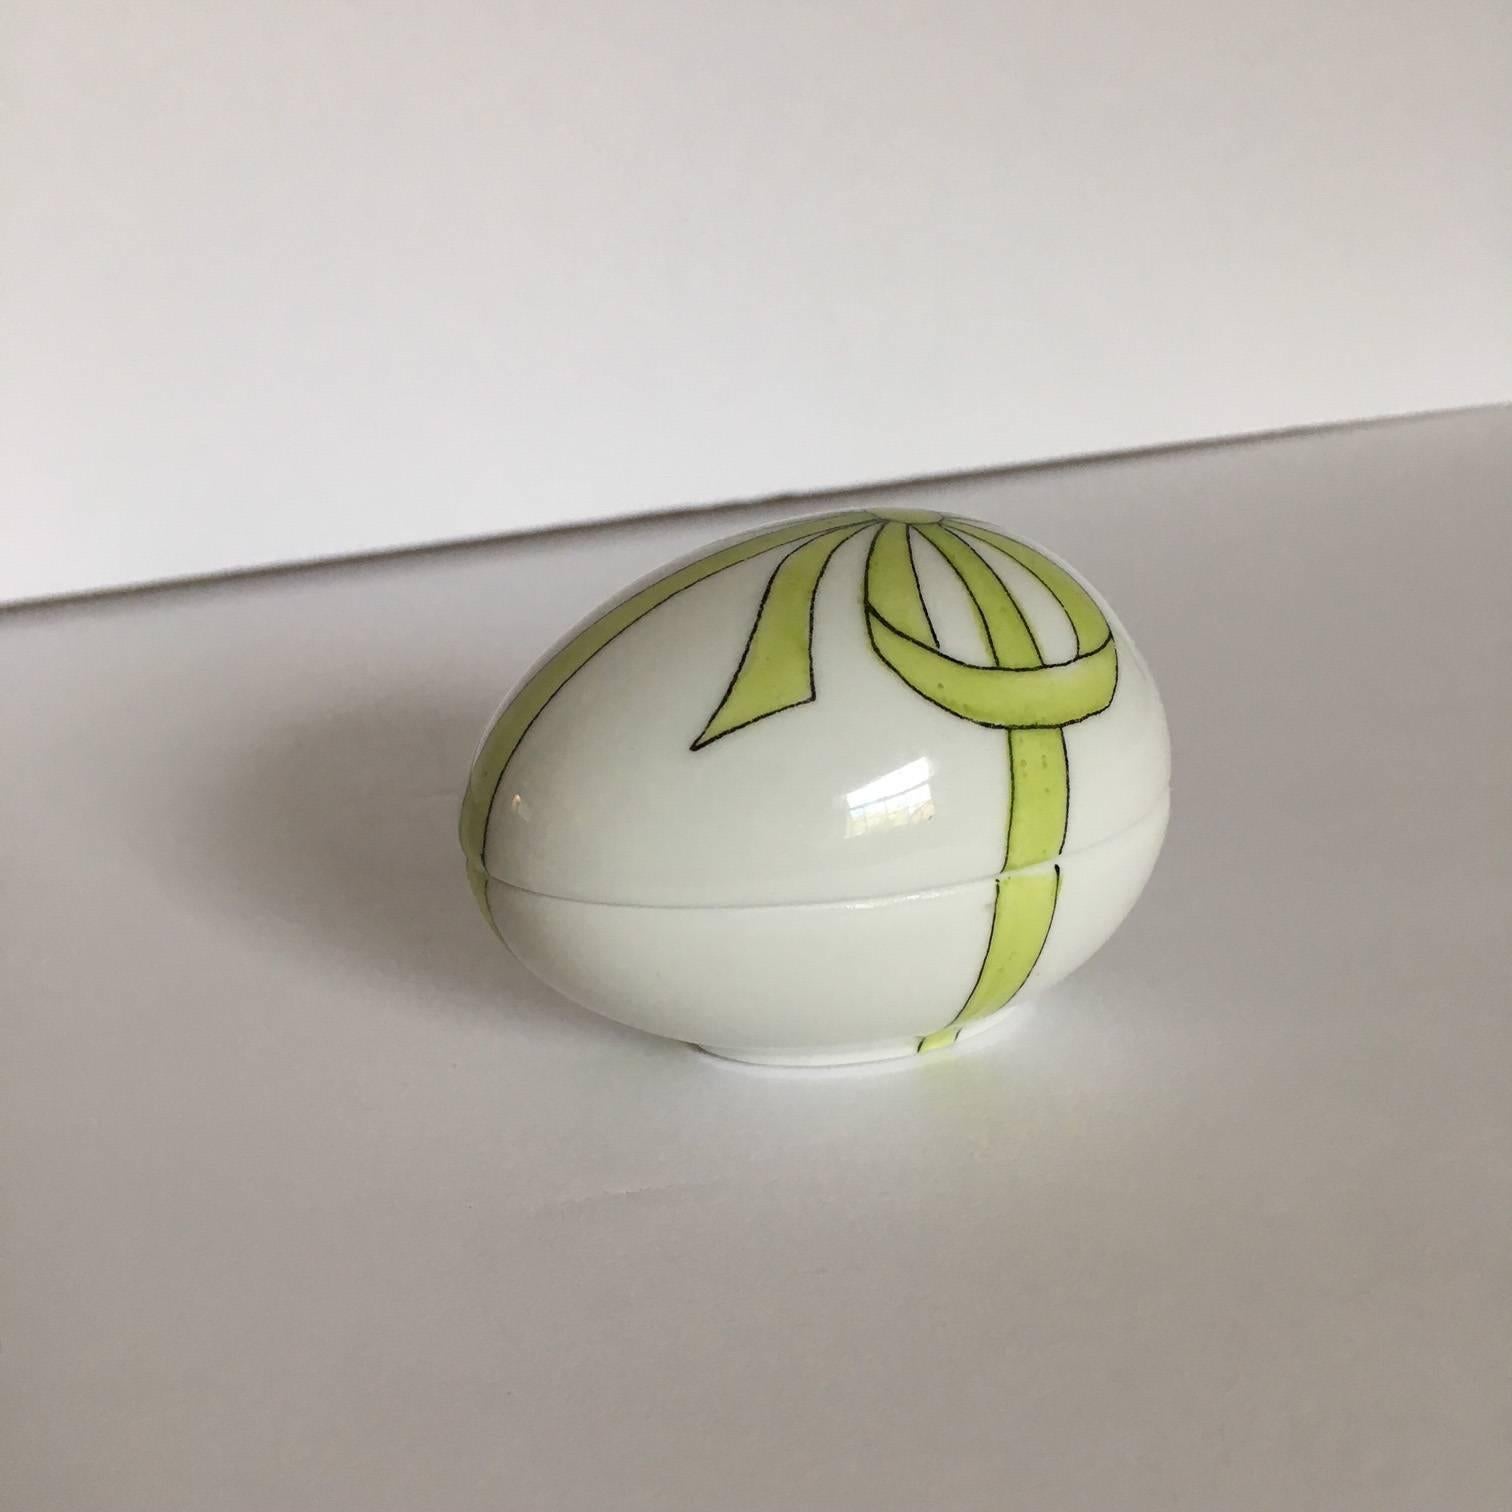 Delightful French Limoges white egg shaped box, decorated with a green ribbon and bow by Chamart Limoges. Perfect for a Mother's Day gift, or for the Limoge collector. From a large estate collection of Limoges boxes.